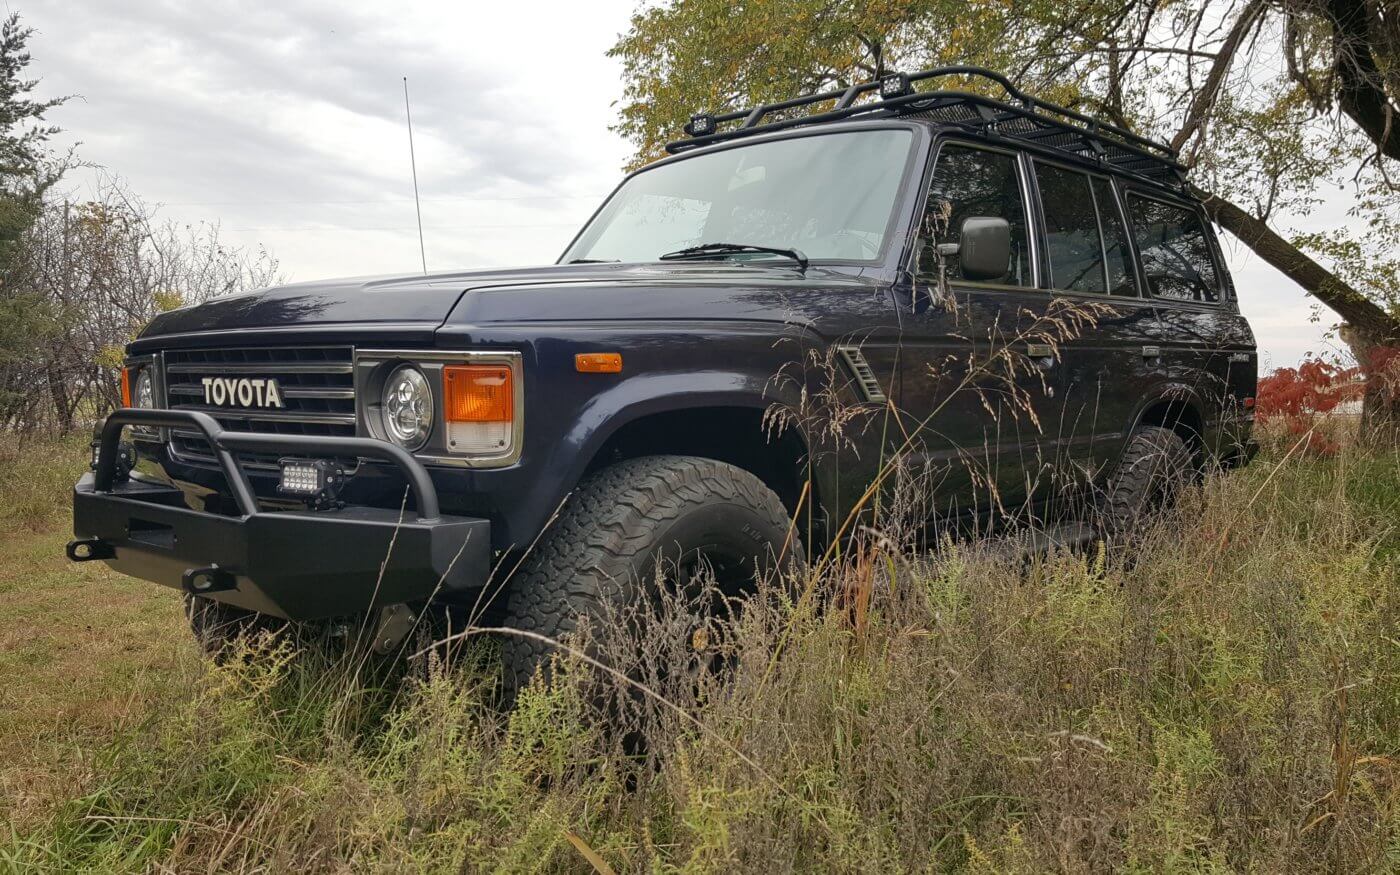 Toyota Land Cruiser FJ60 Fully Restored with V8 Engine Custom Aftermarket Front and Rear Bumpers